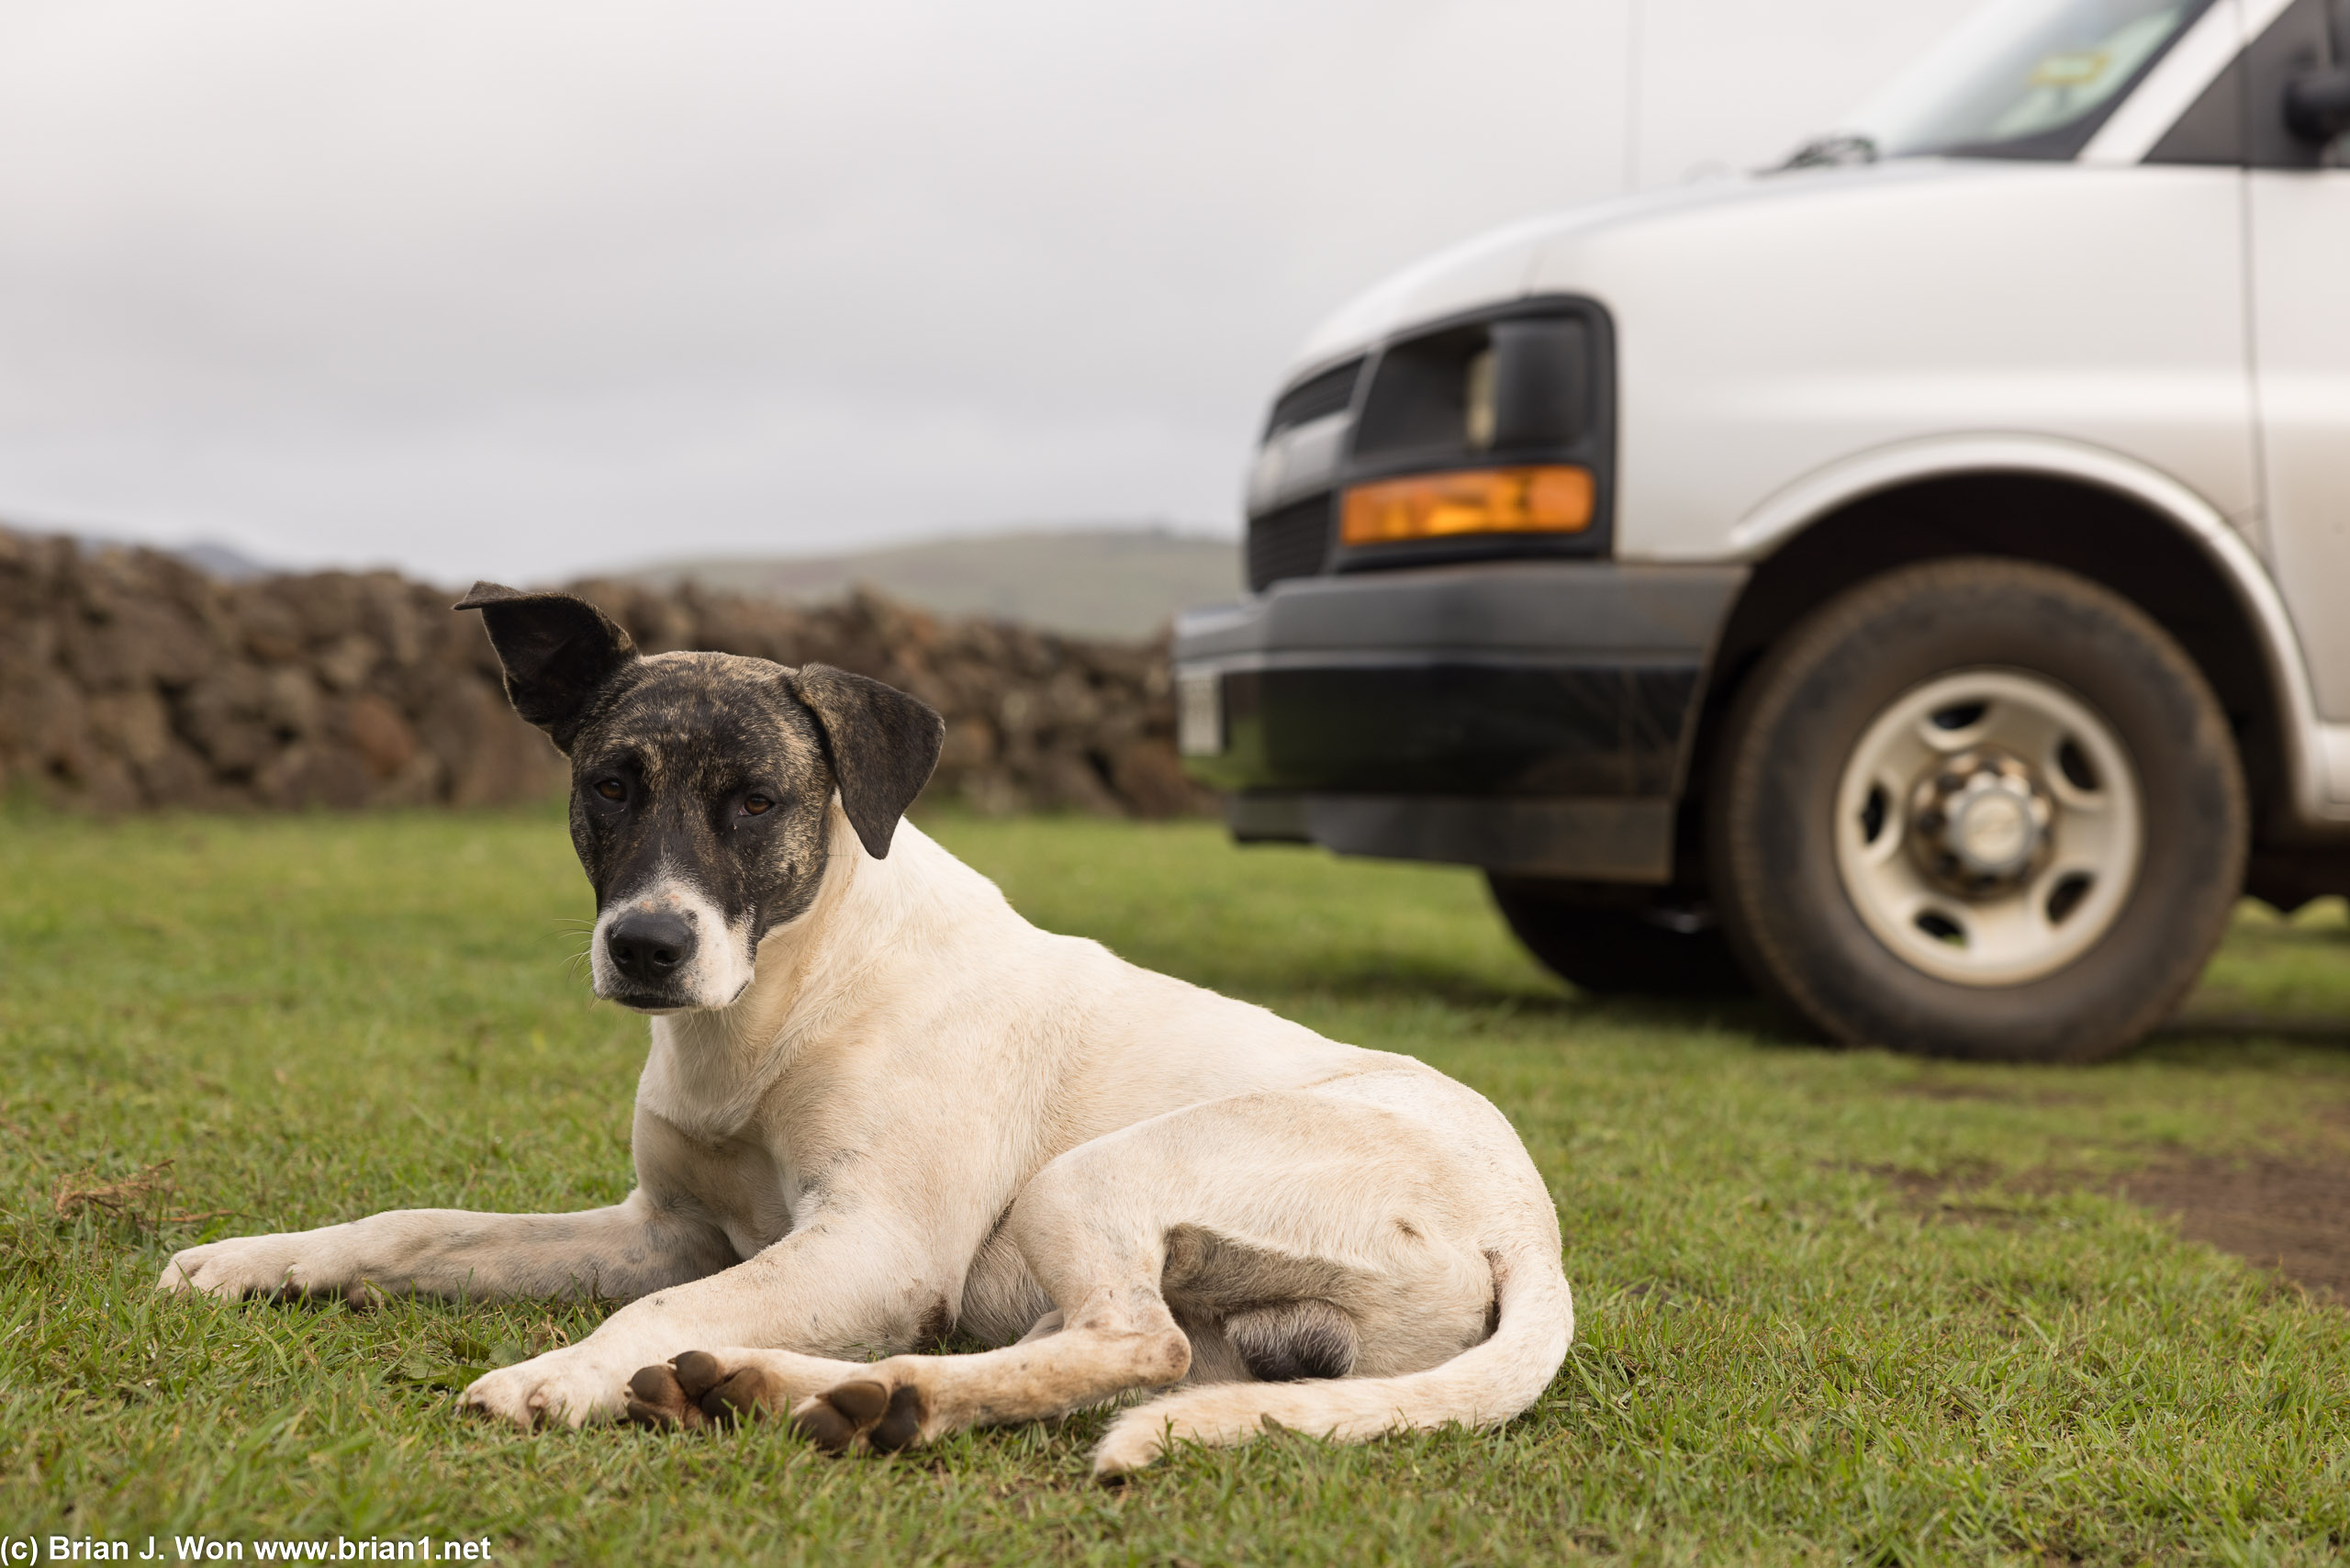 Horses, cows, cats, and plenthy of stray dogs on Easter Island.